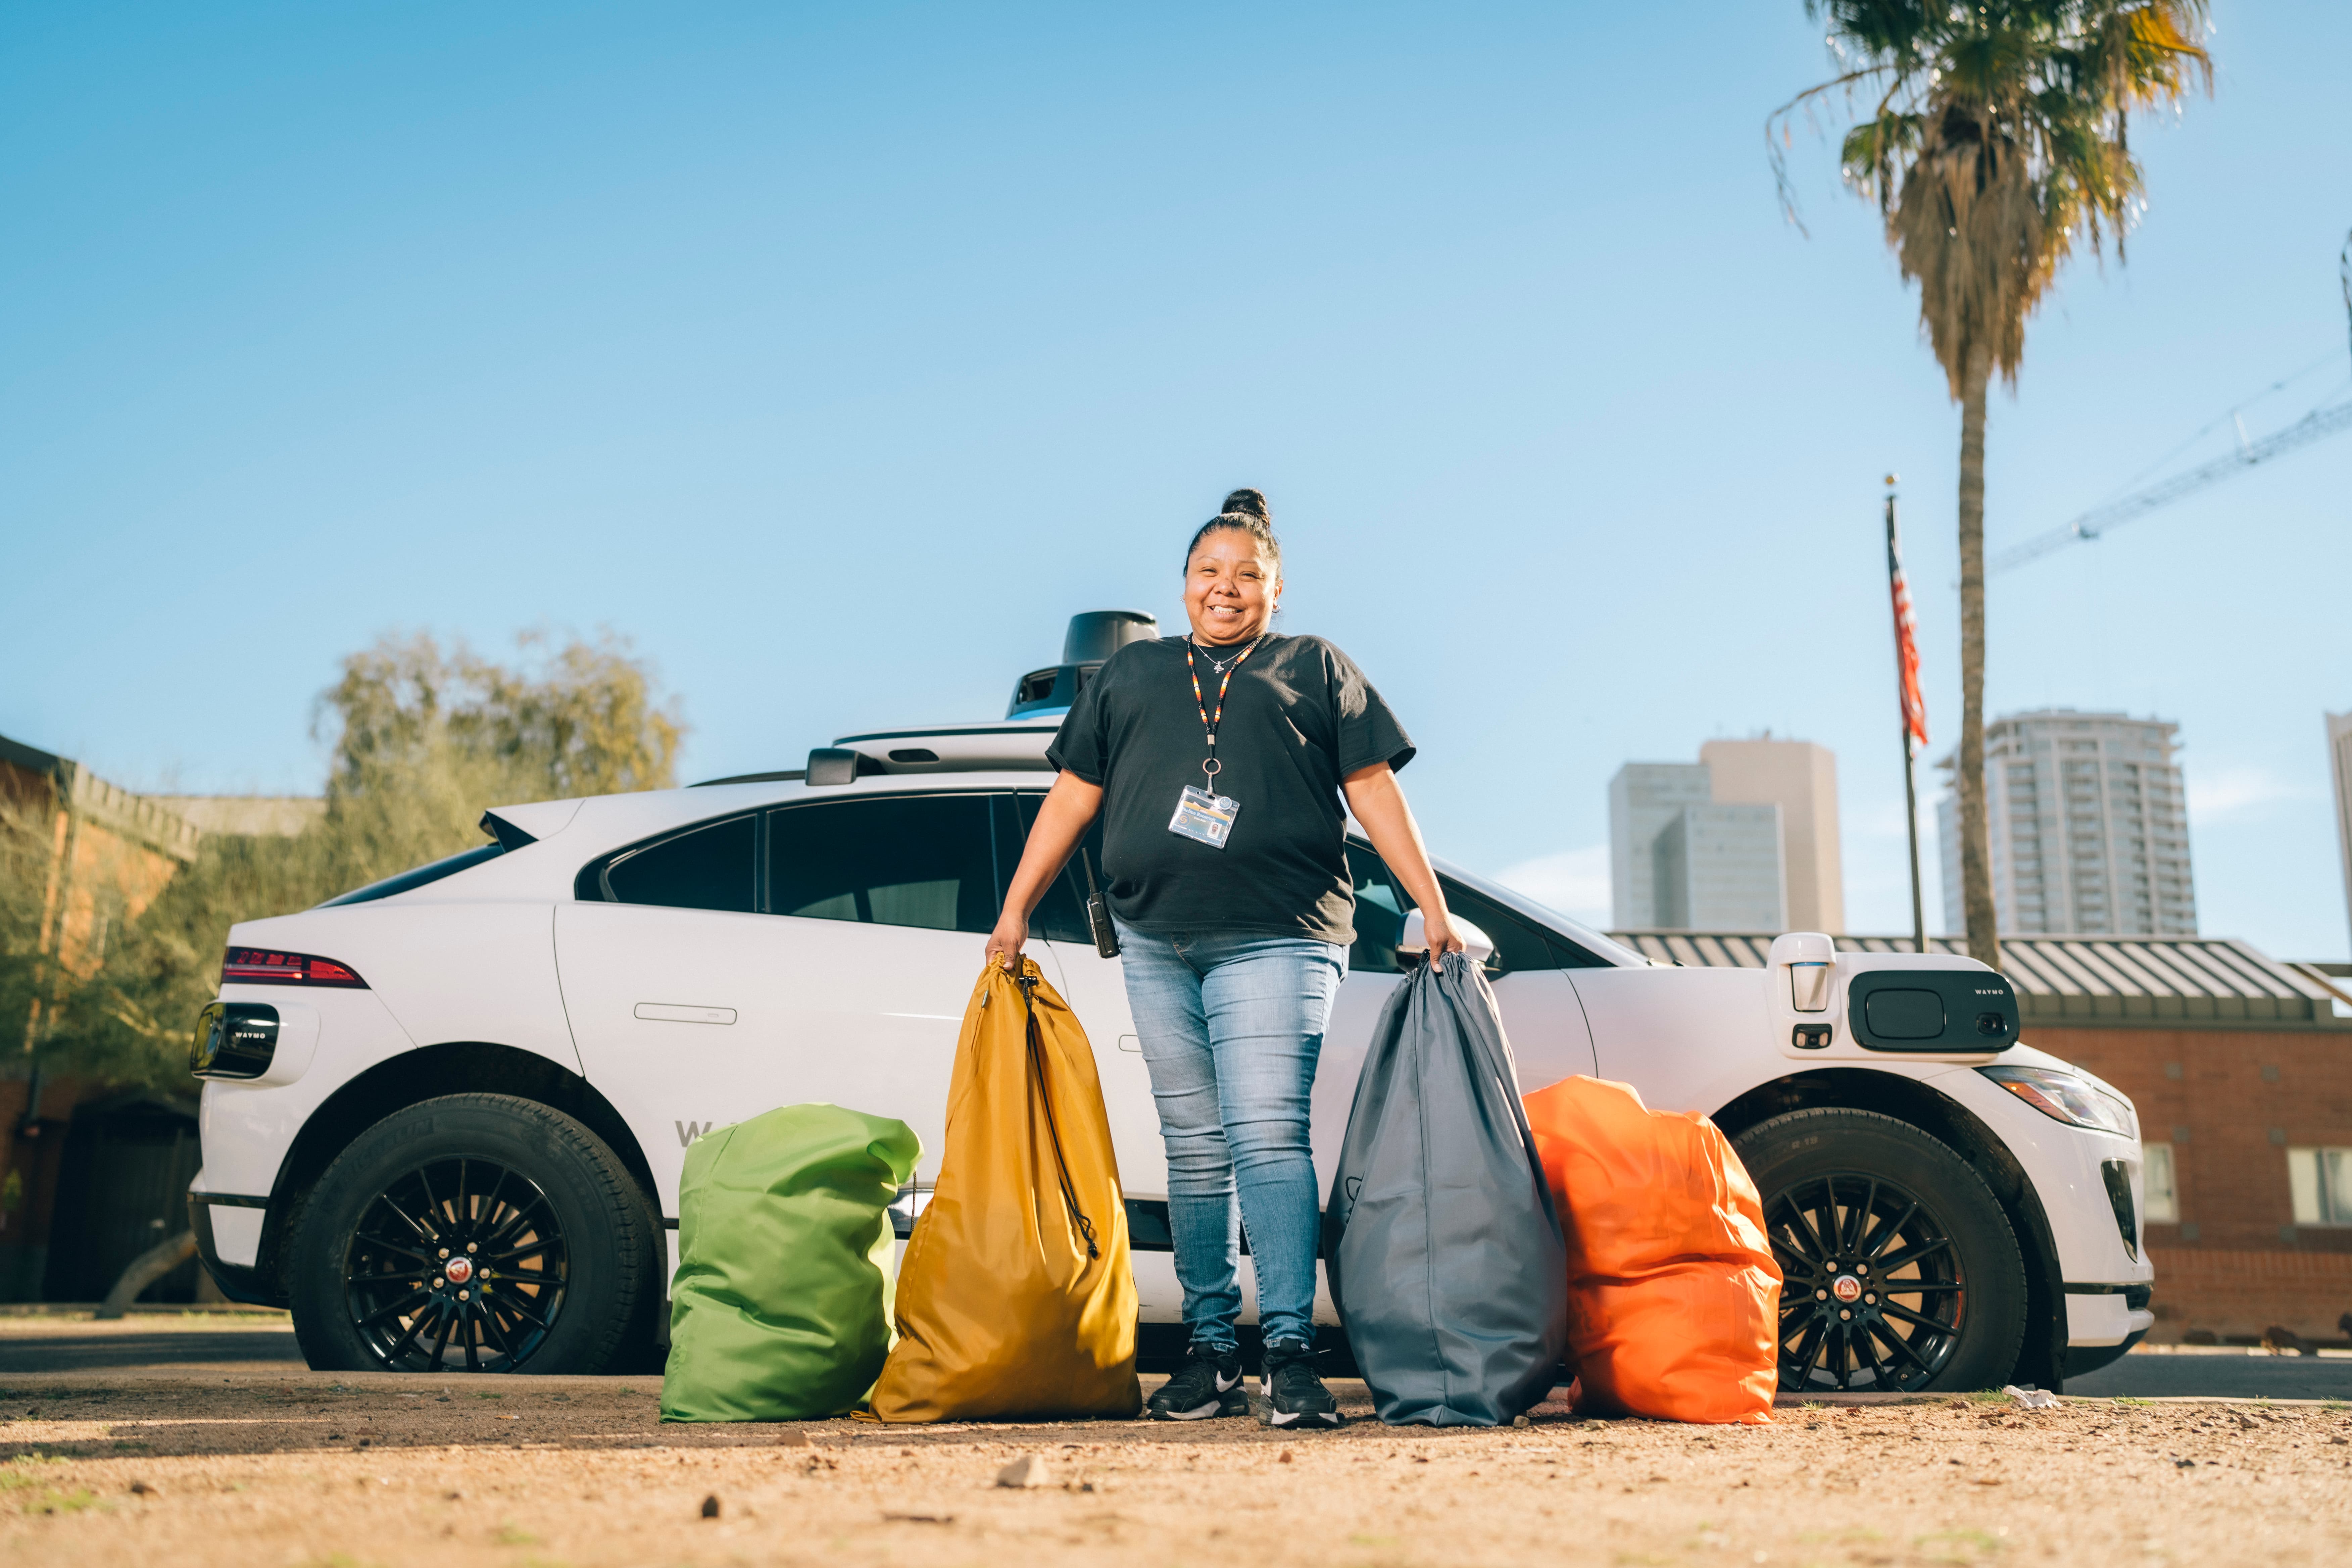 Phoenix Nonprofit Shoulders One Less Load with Help from Waymo